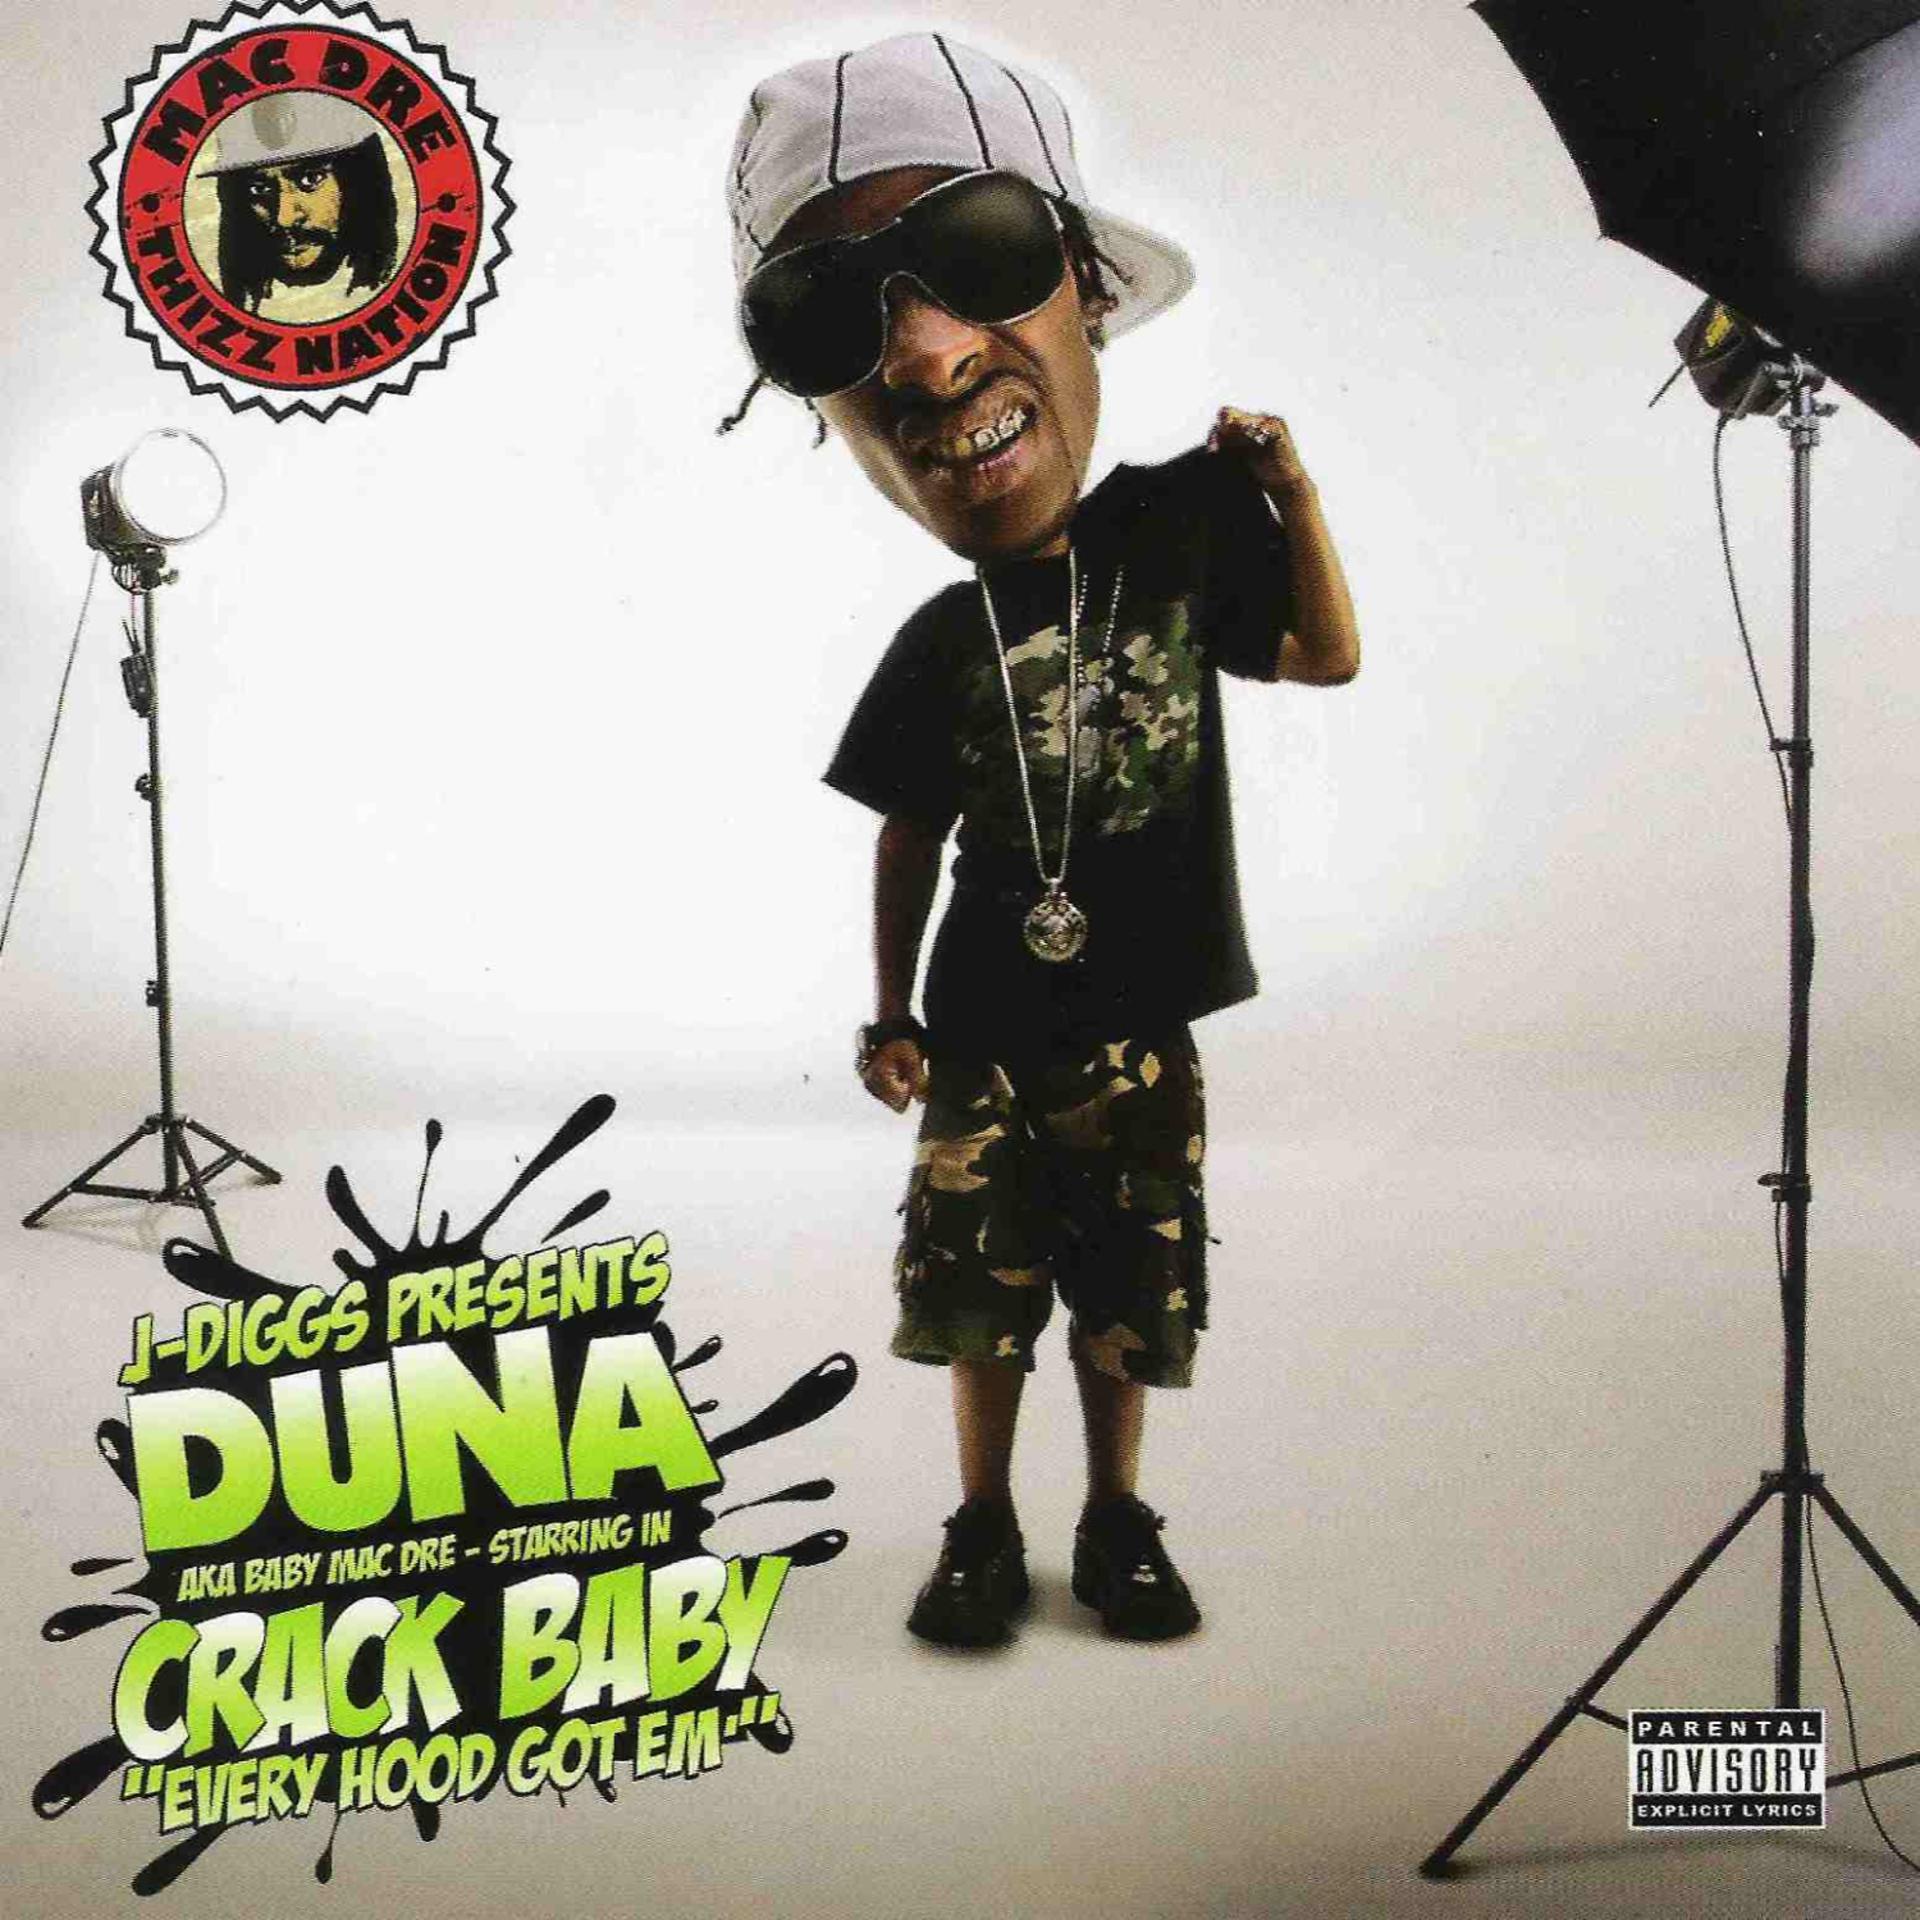 Постер альбома J. Diggs Presents: Duna A.K.A. Baby Mac Dre Starring in Crack Baby